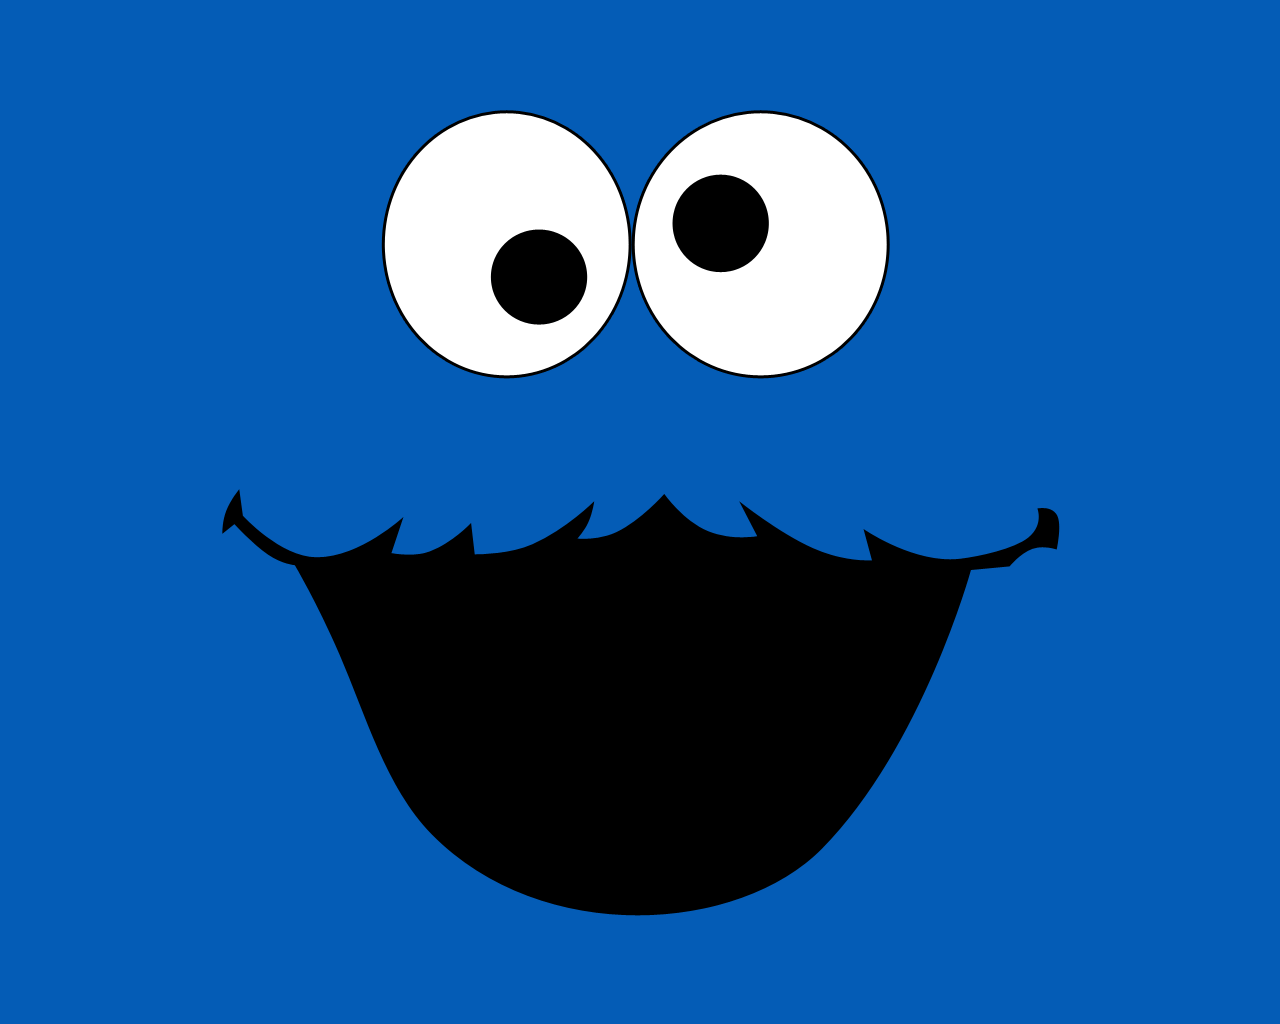 SS - Cookie Monster by urbandubjoint on DeviantArt